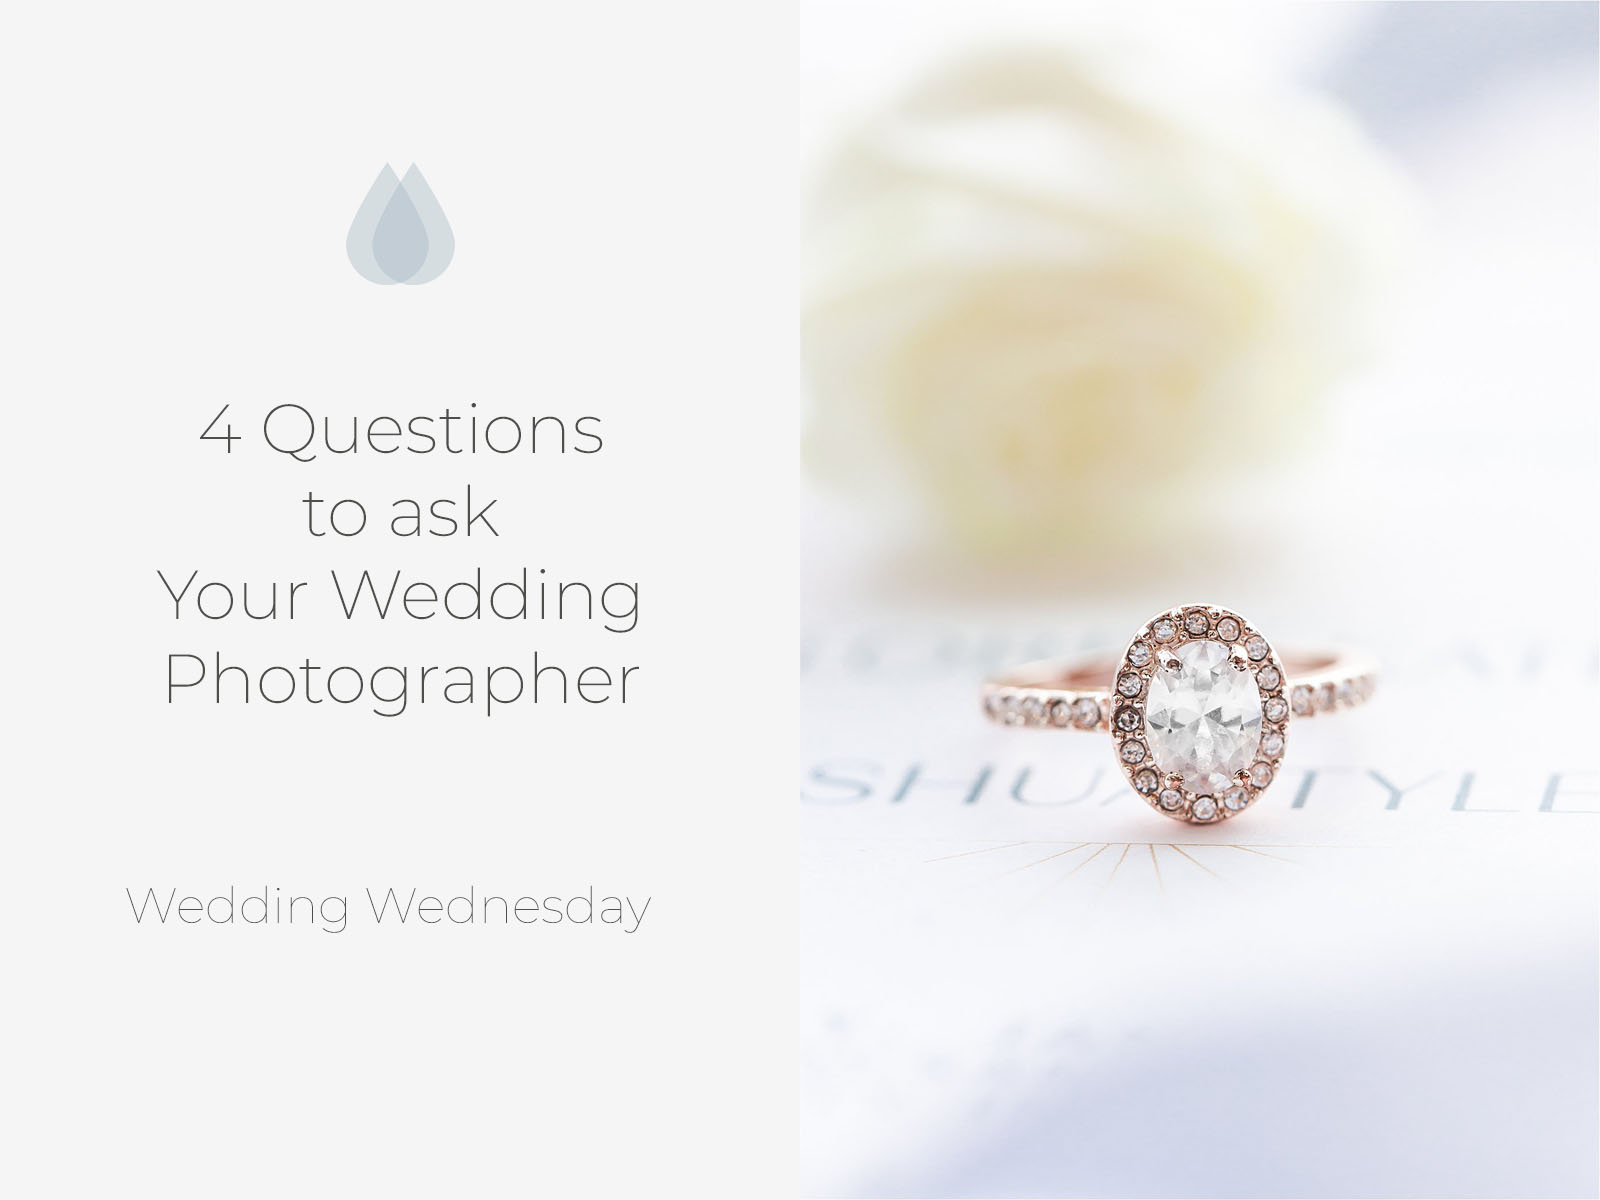 Questions to ask your Wedding Photographer